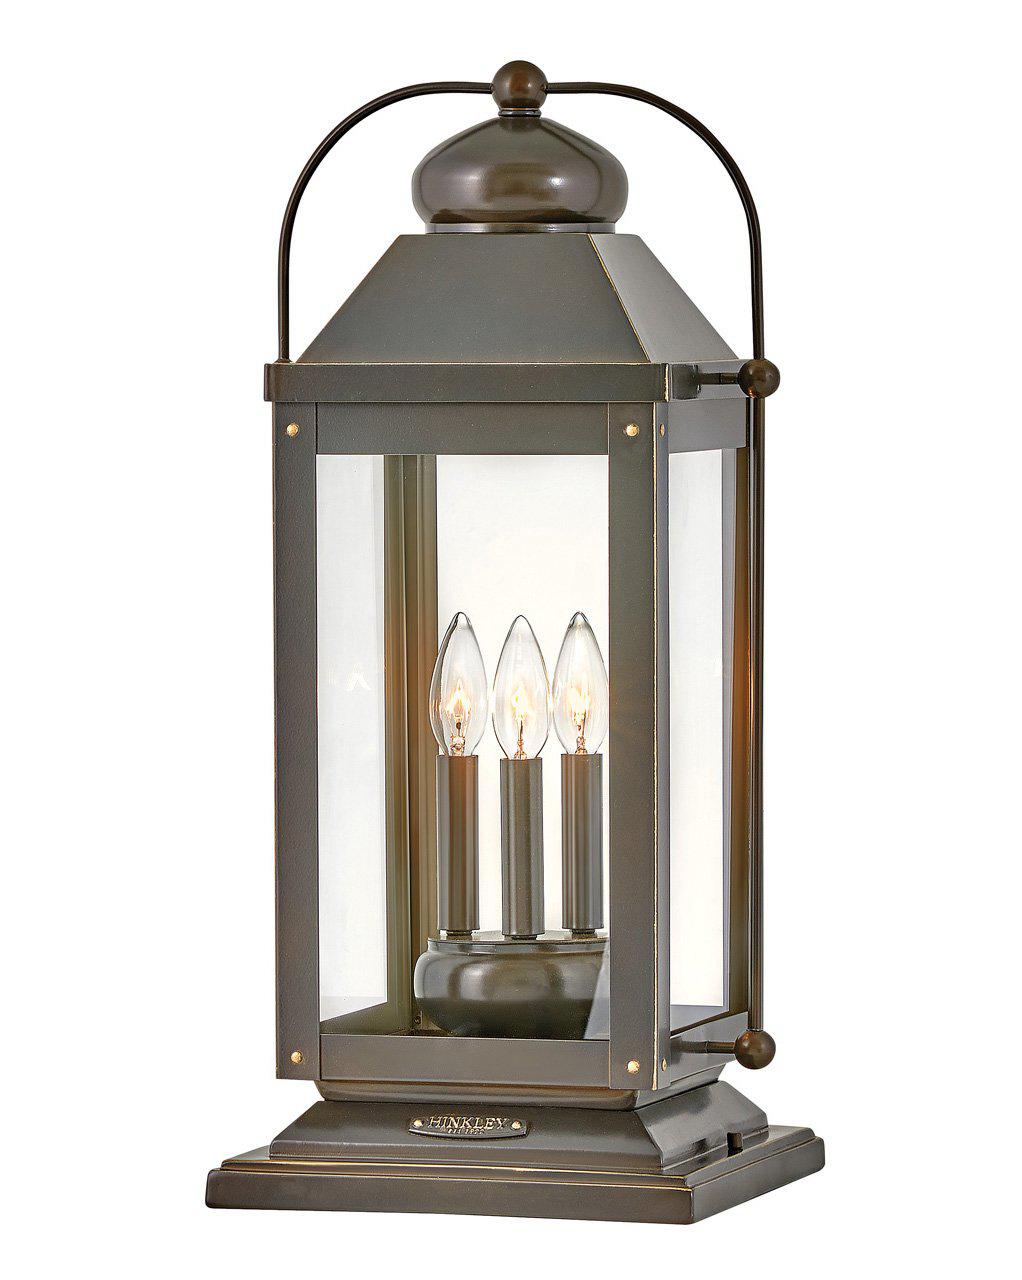 ANCHORAGE-Large Pier Mount Lantern Outdoor l Wall Hinkley Light Oiled Bronze  